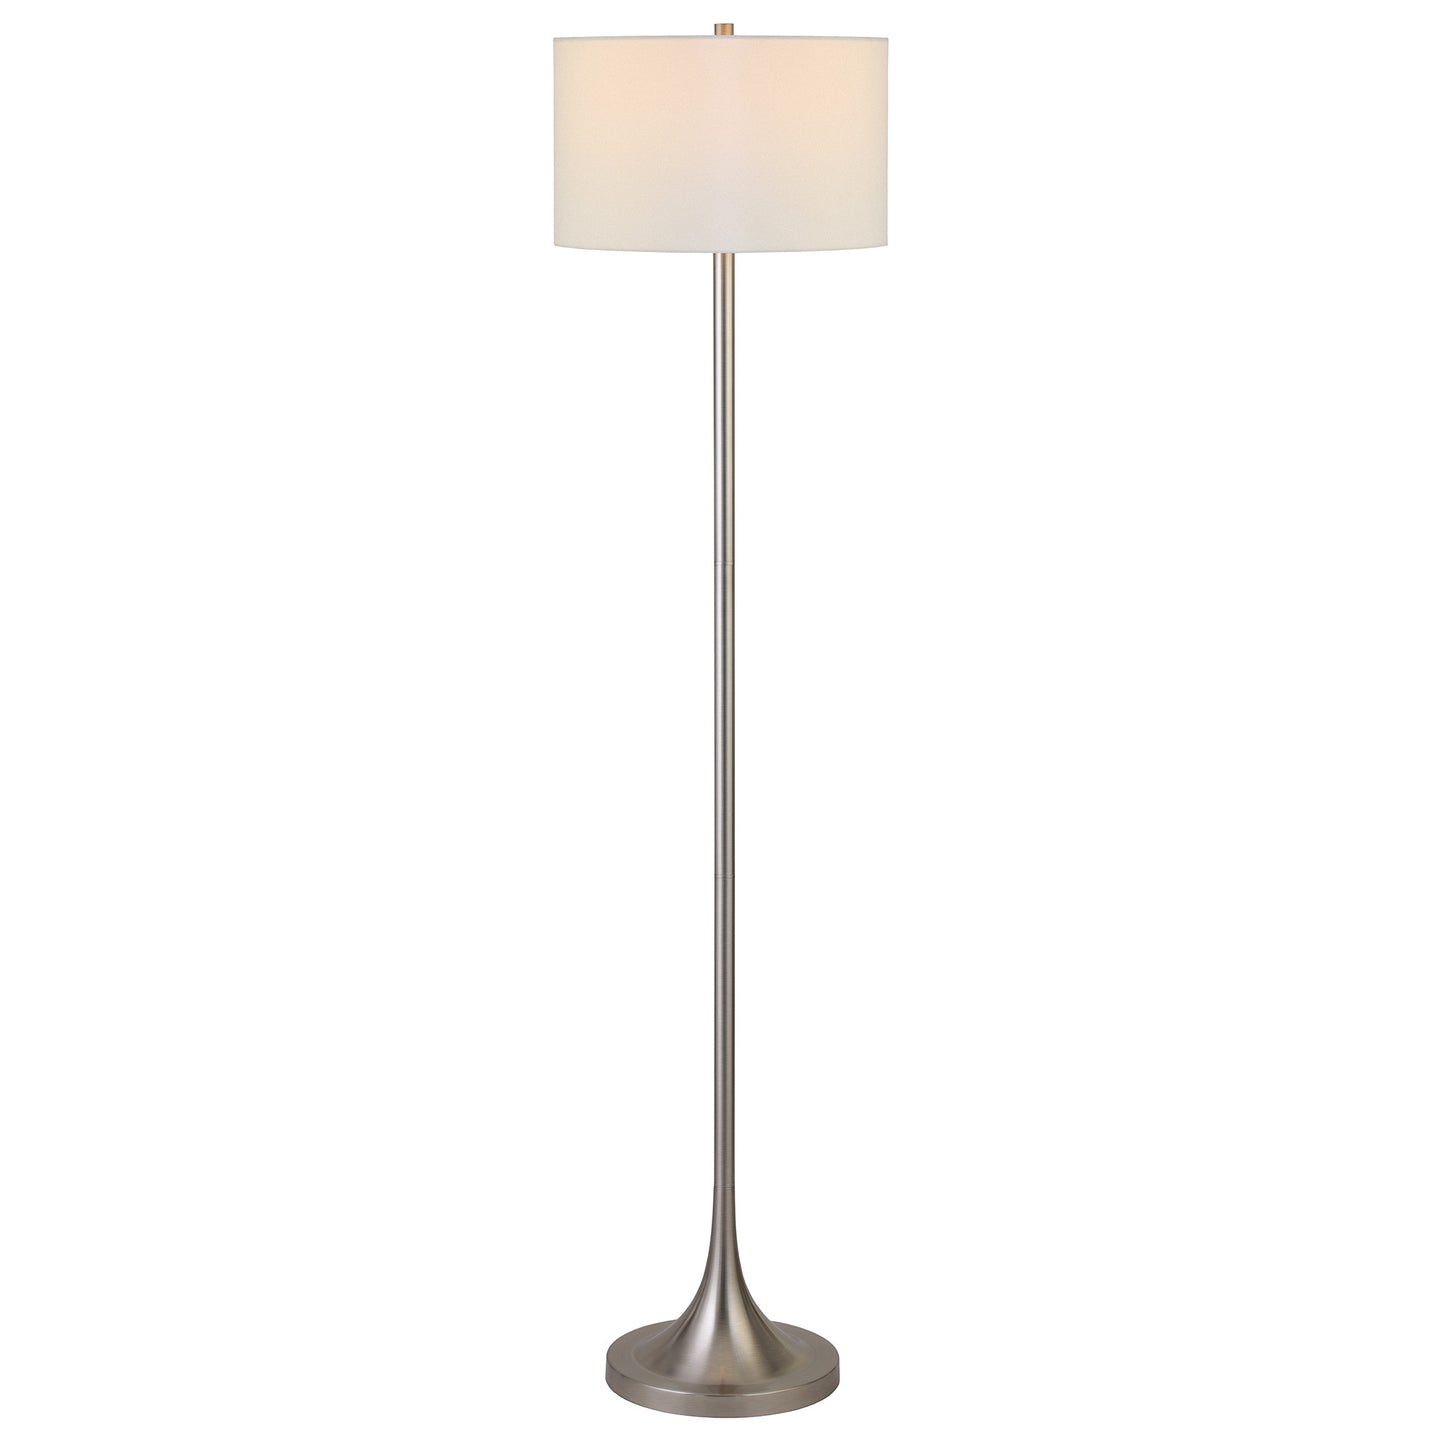 62" Nickel Traditional Shaped Floor Lamp With White Frosted Glass Drum Shade